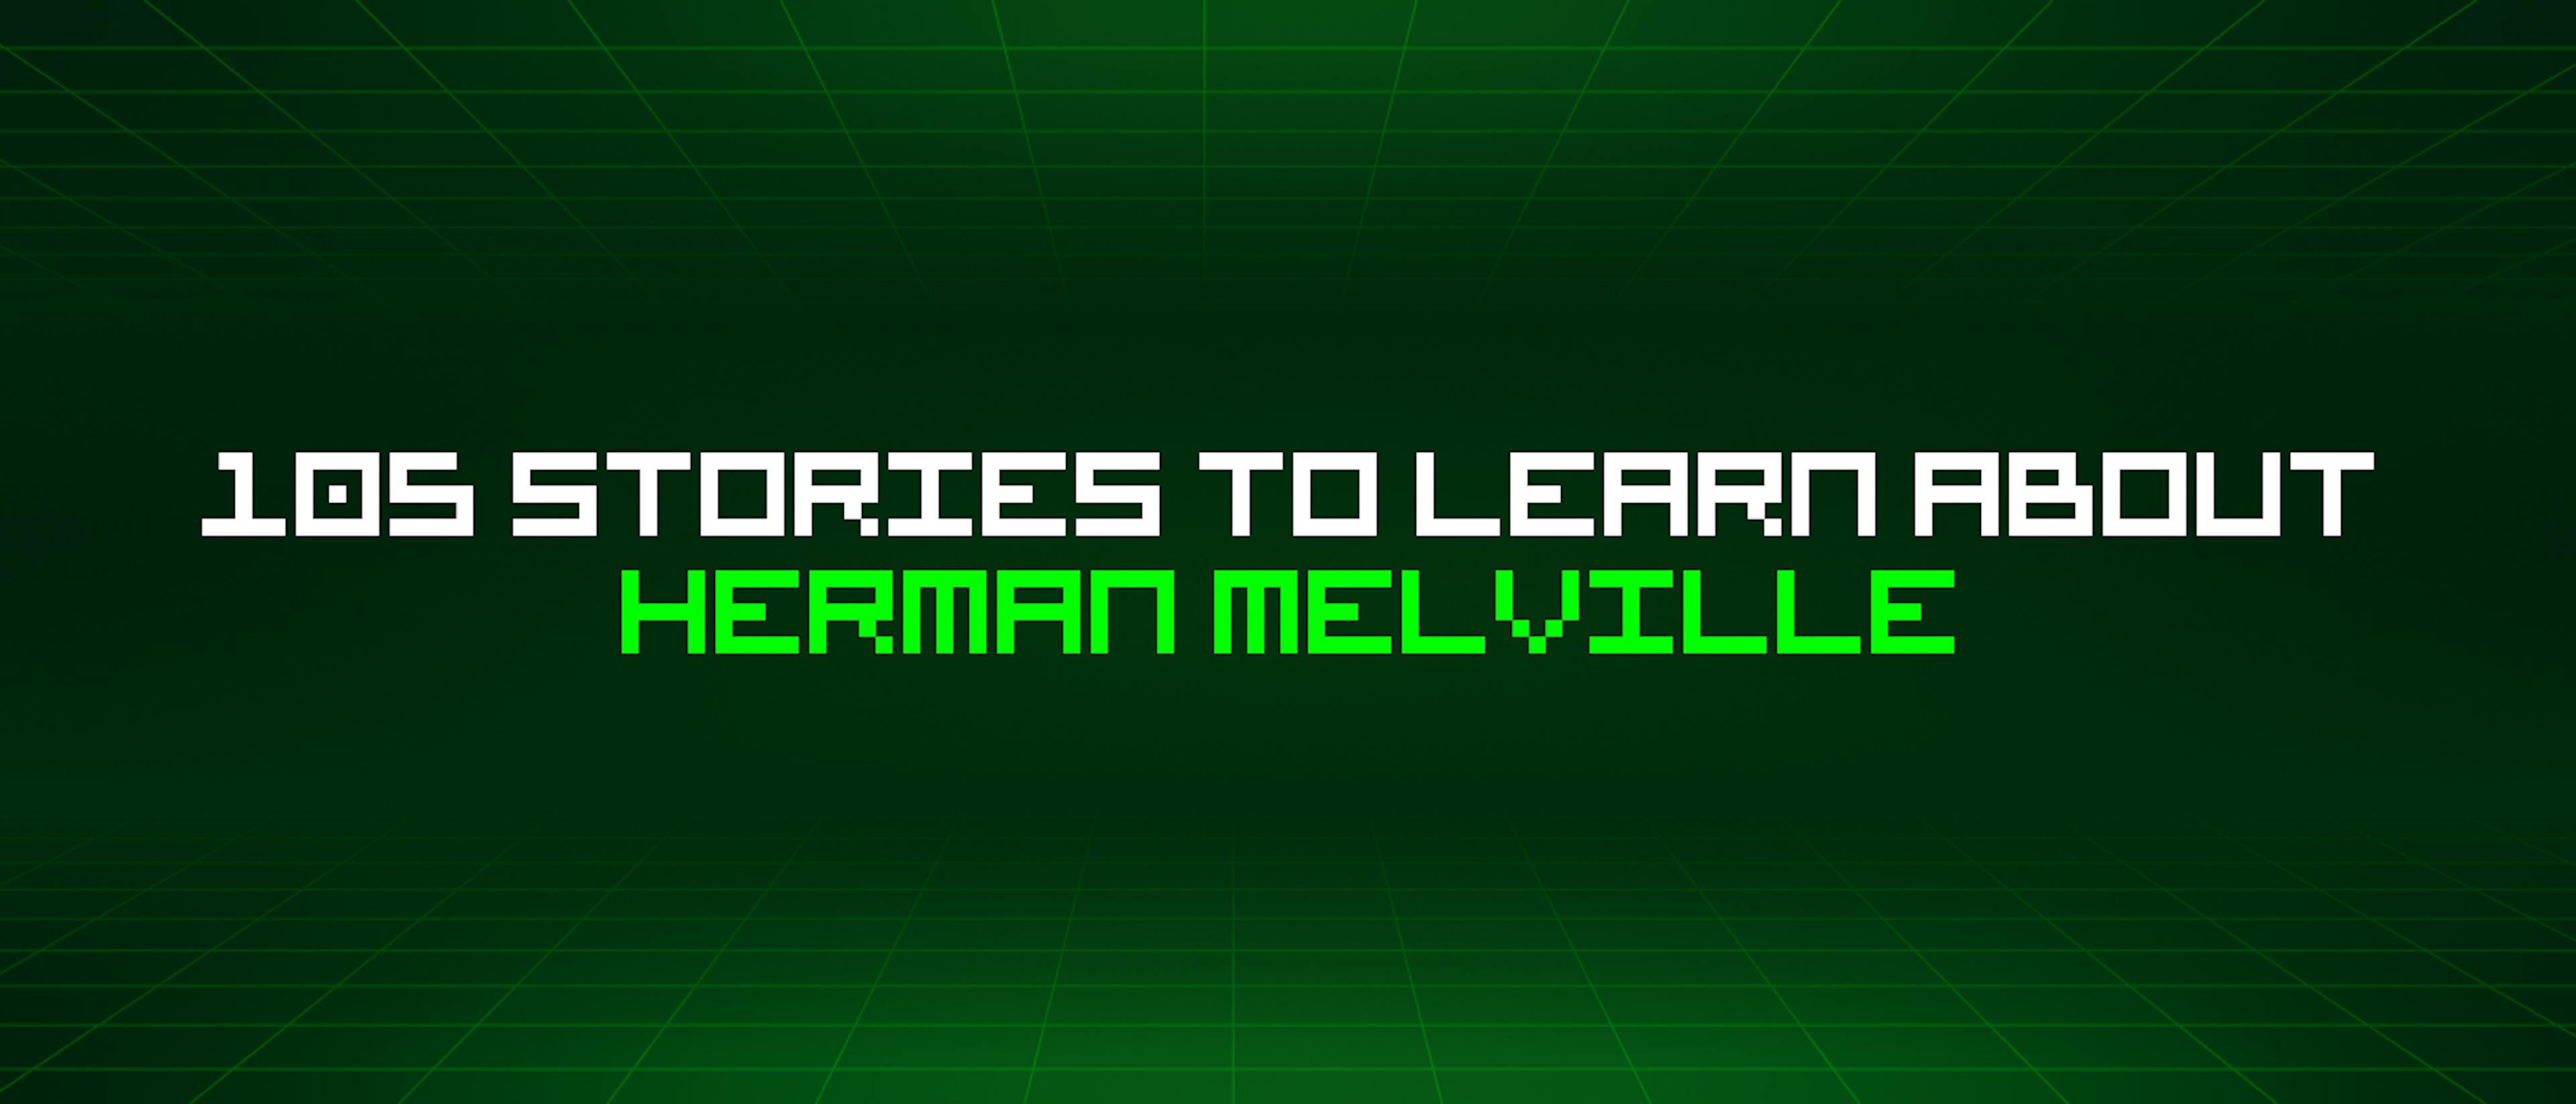 featured image - 105 Stories To Learn About Herman Melville